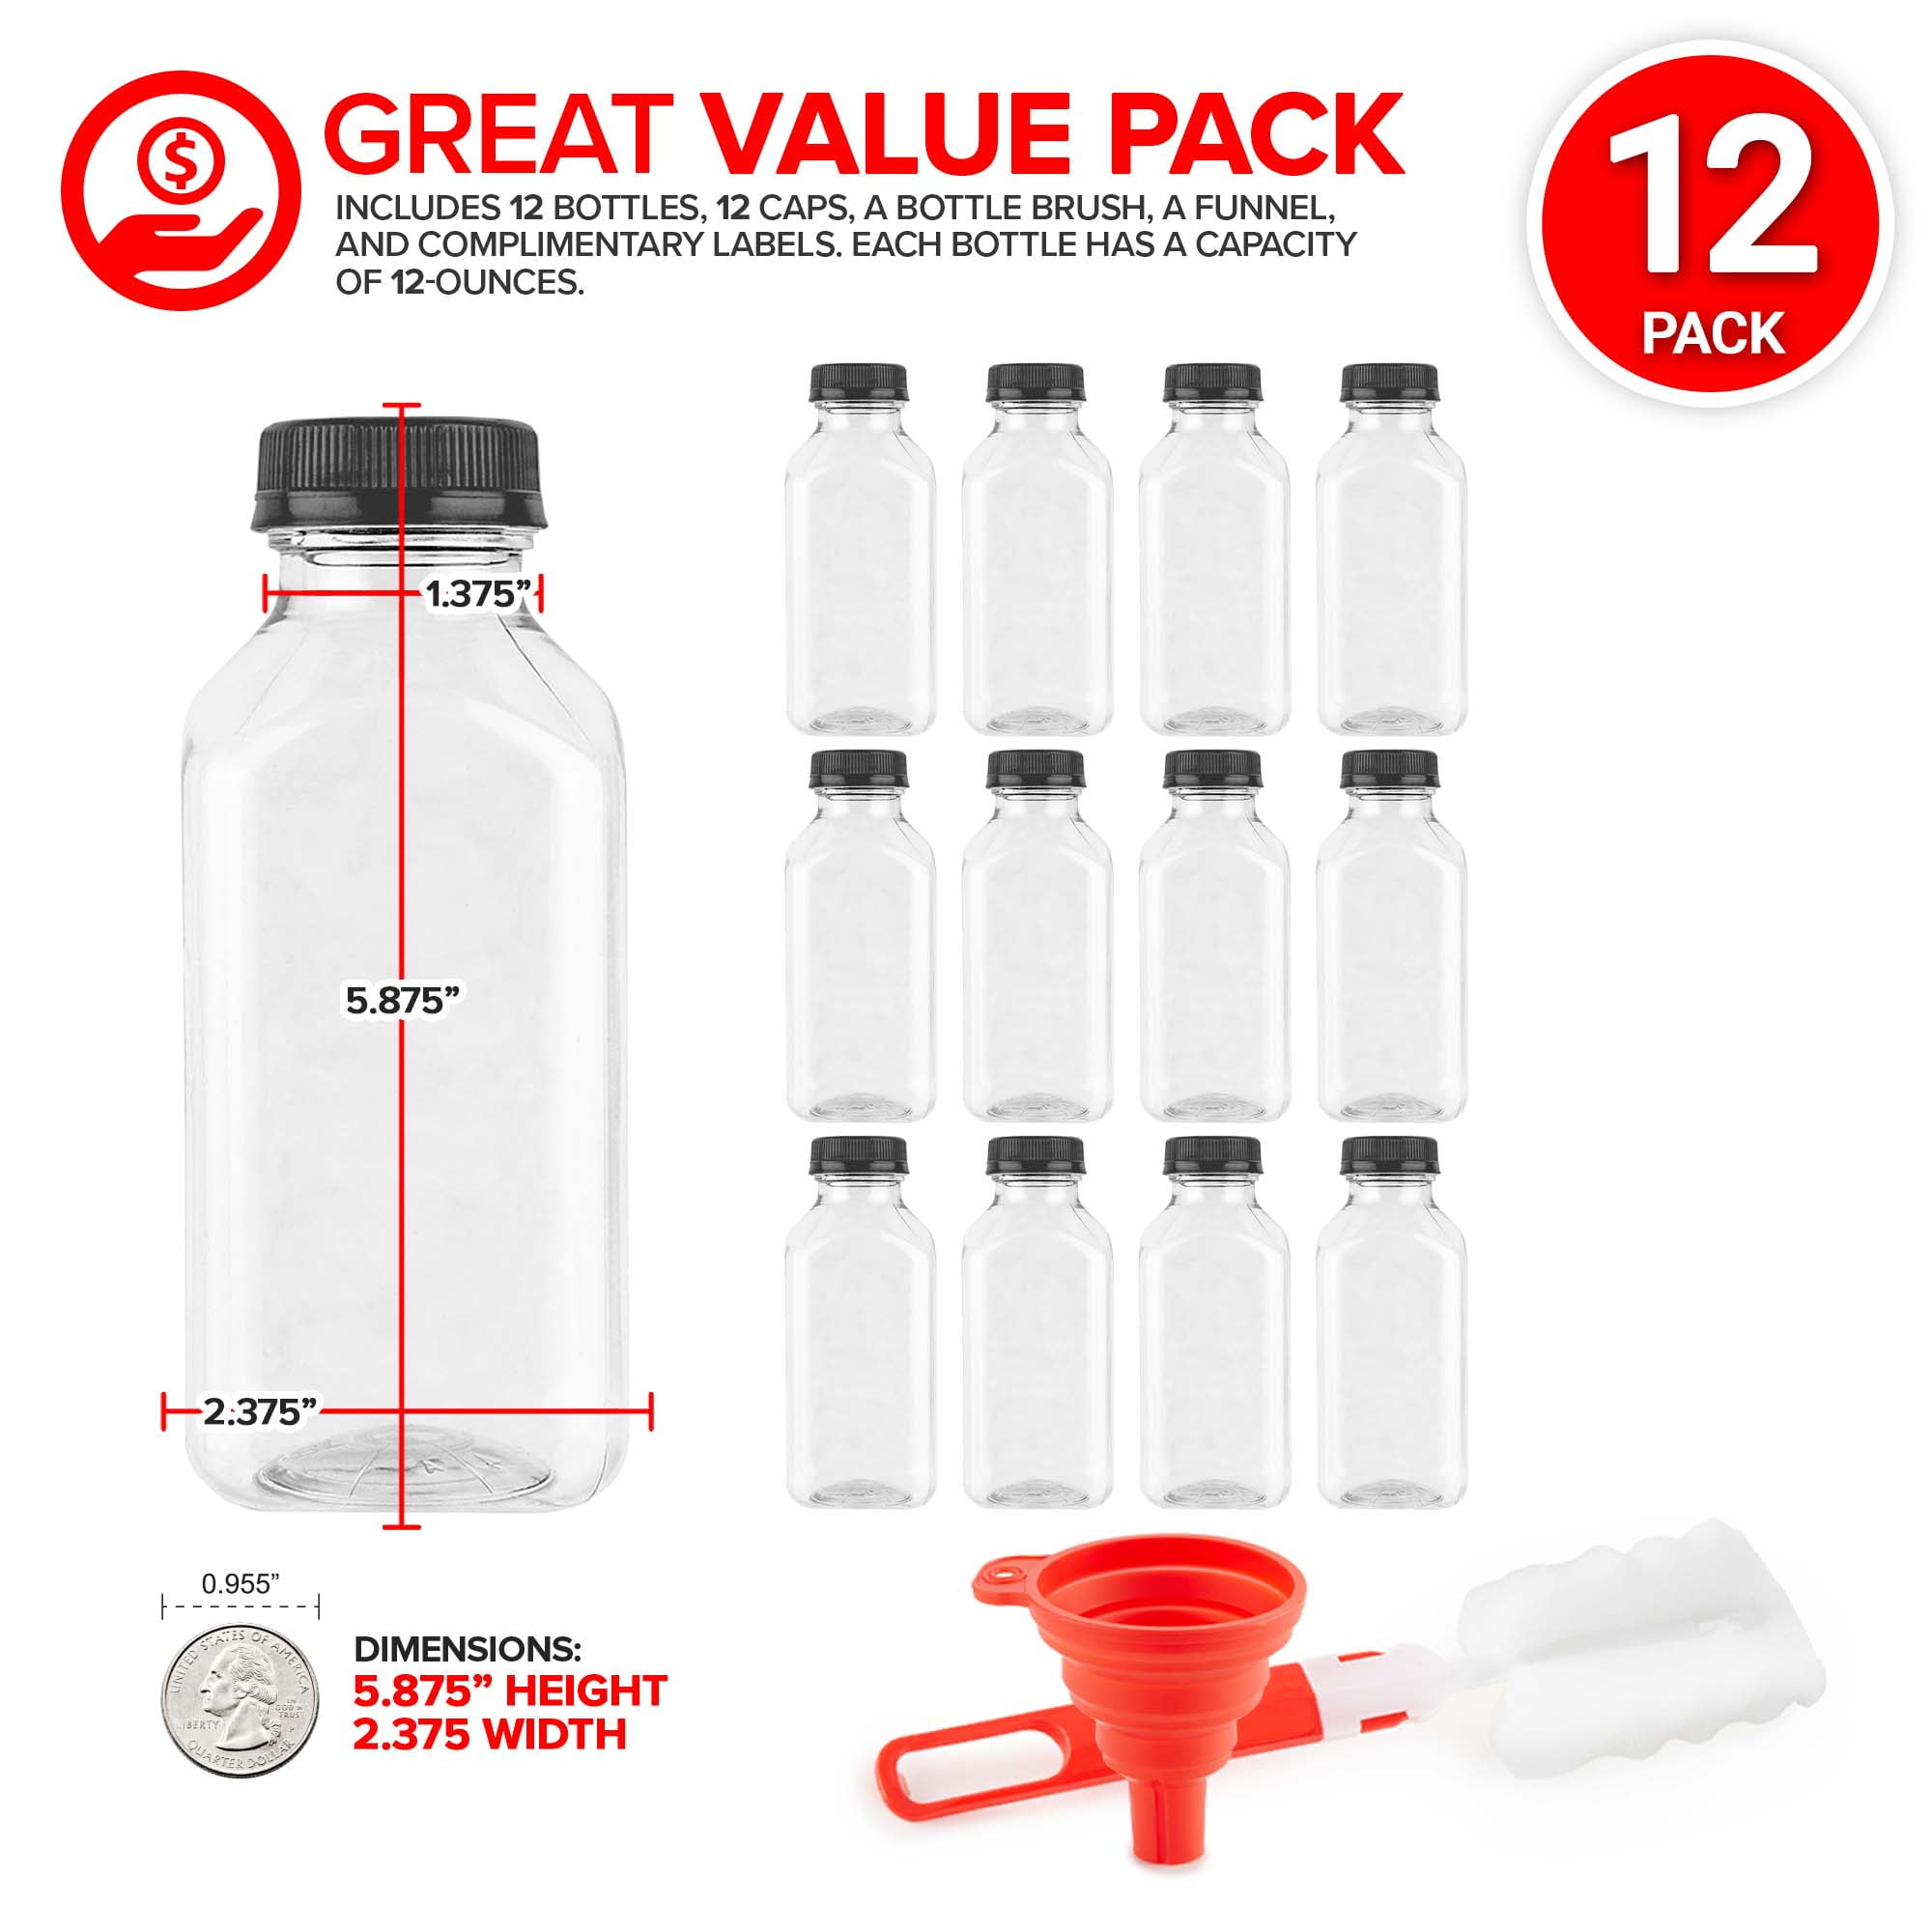 12oz Reusable Clear Plastic Juice Bottles with Caps, 12 Pack, by Stock Your  Home 